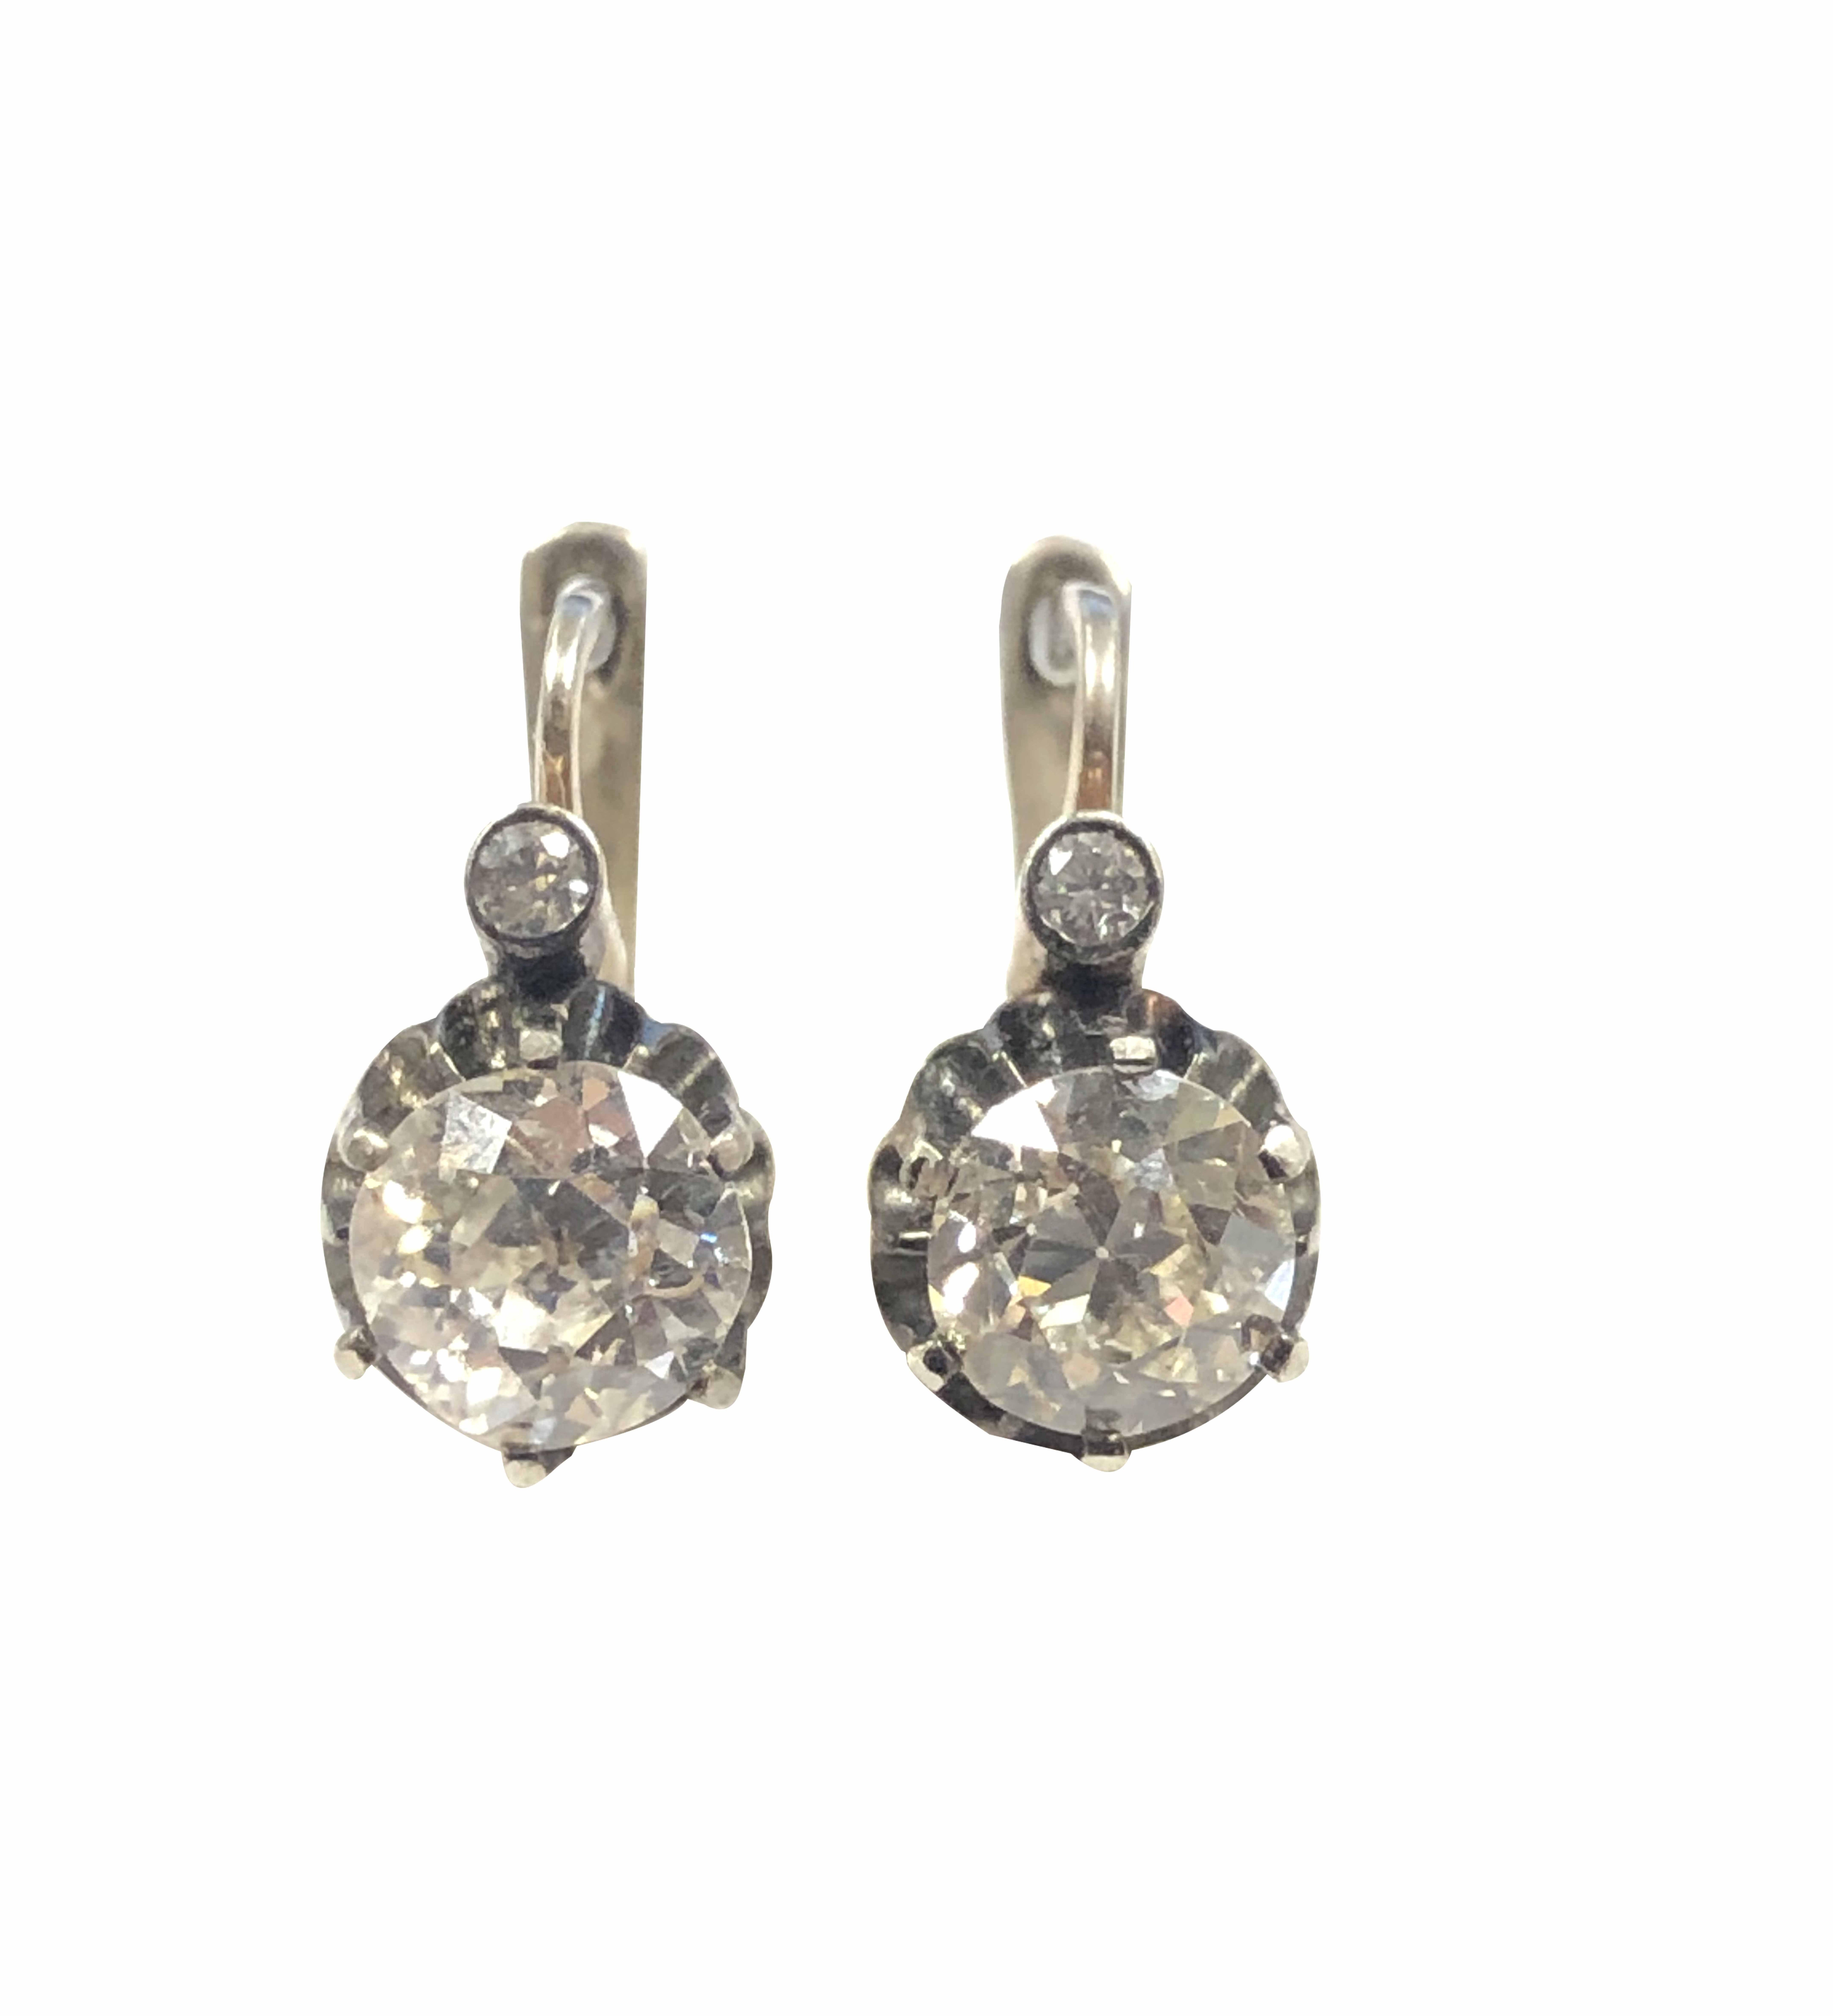 Circa 1900 Diamond Earrings measuring 1/2 inch in length, silver Basket settings with a Lever backing, set with old mine cut Diamonds totaling 2.33 Carats total and grading as I in Color and SI in clarity, further set with 2 smaller old cut